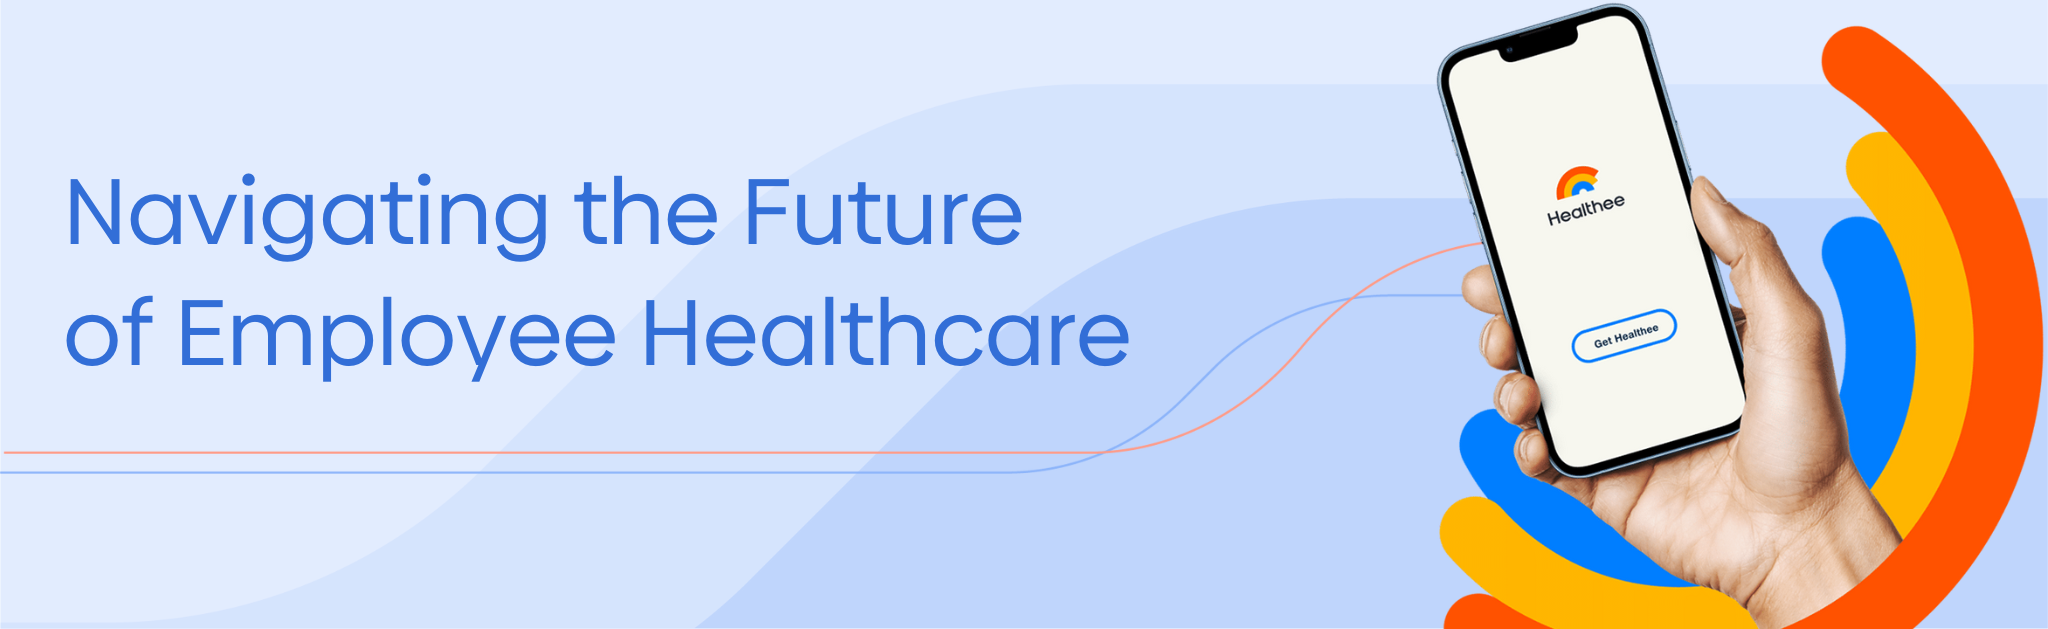 Navigating the Future of Employee Healthcare: Our Investment in Healthee